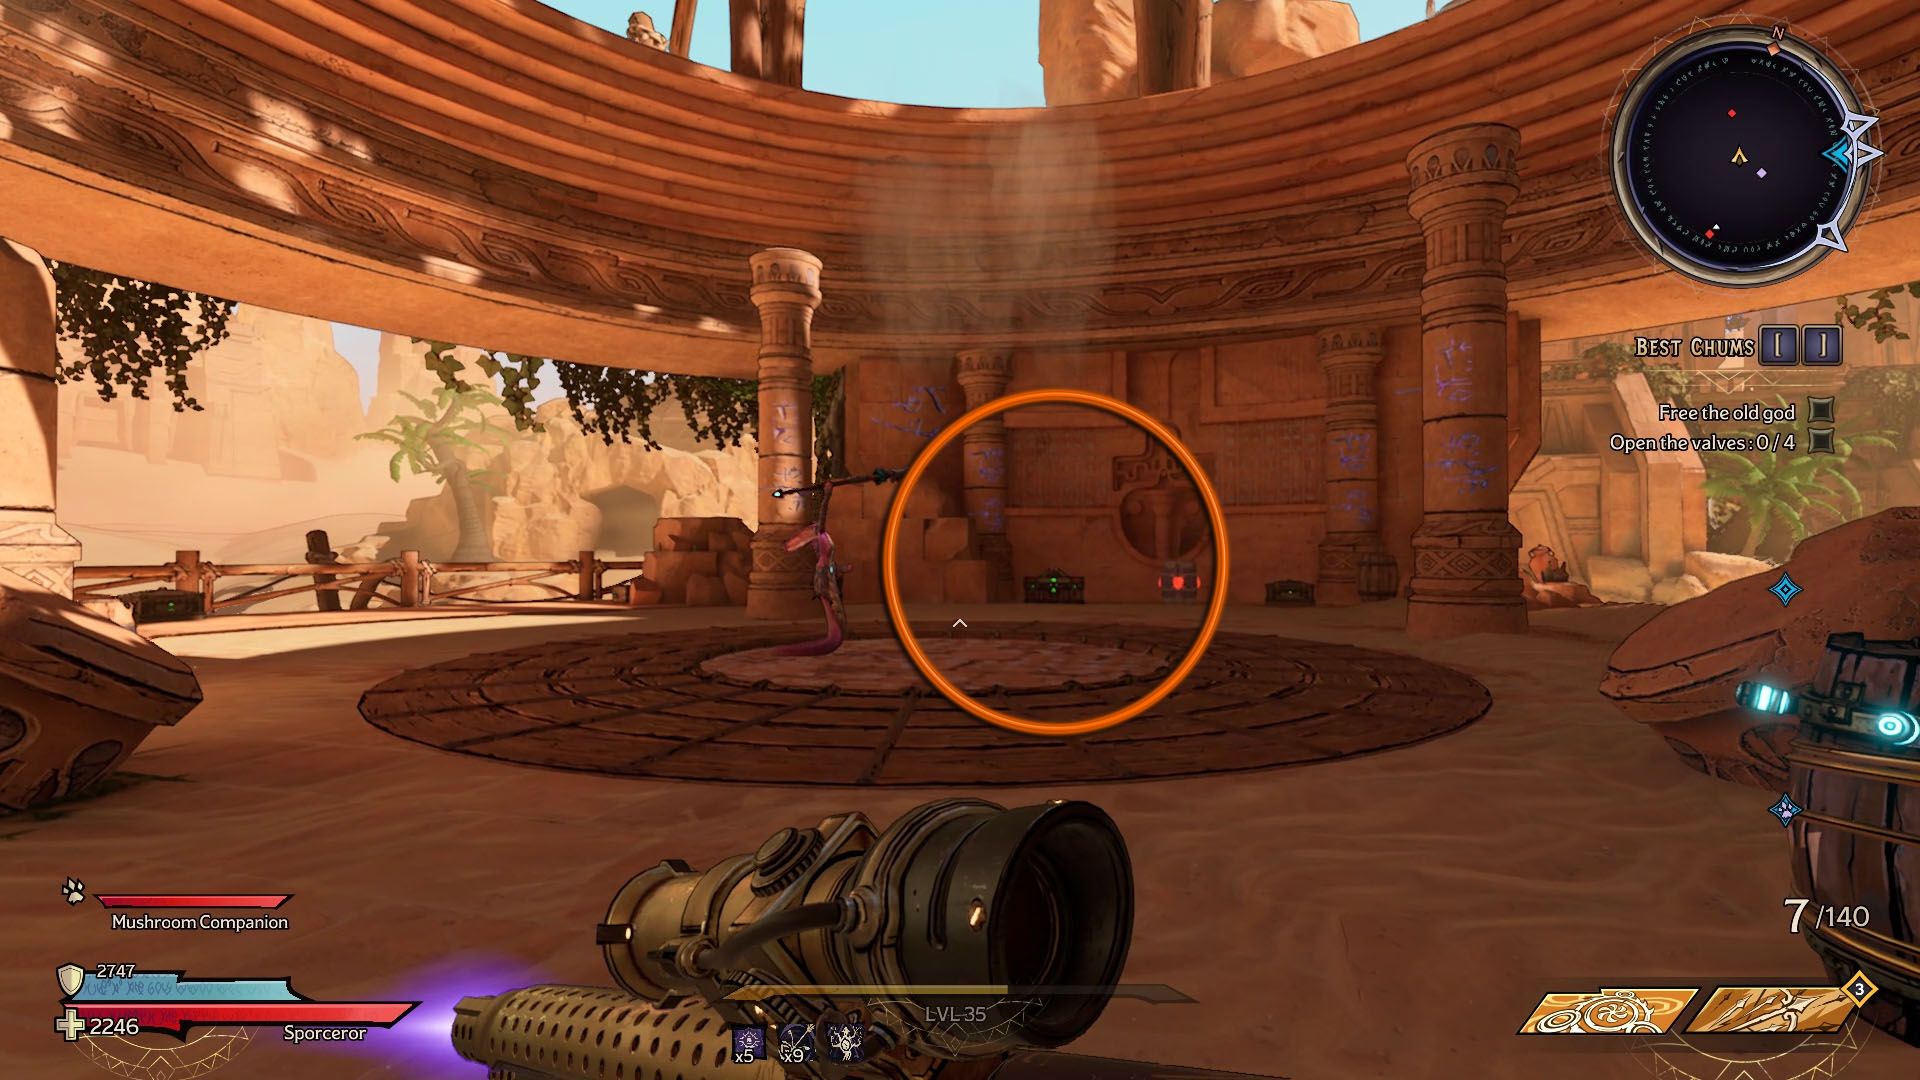 In Area 3 player looks at Soul Chest 3 against the wall of circular temple